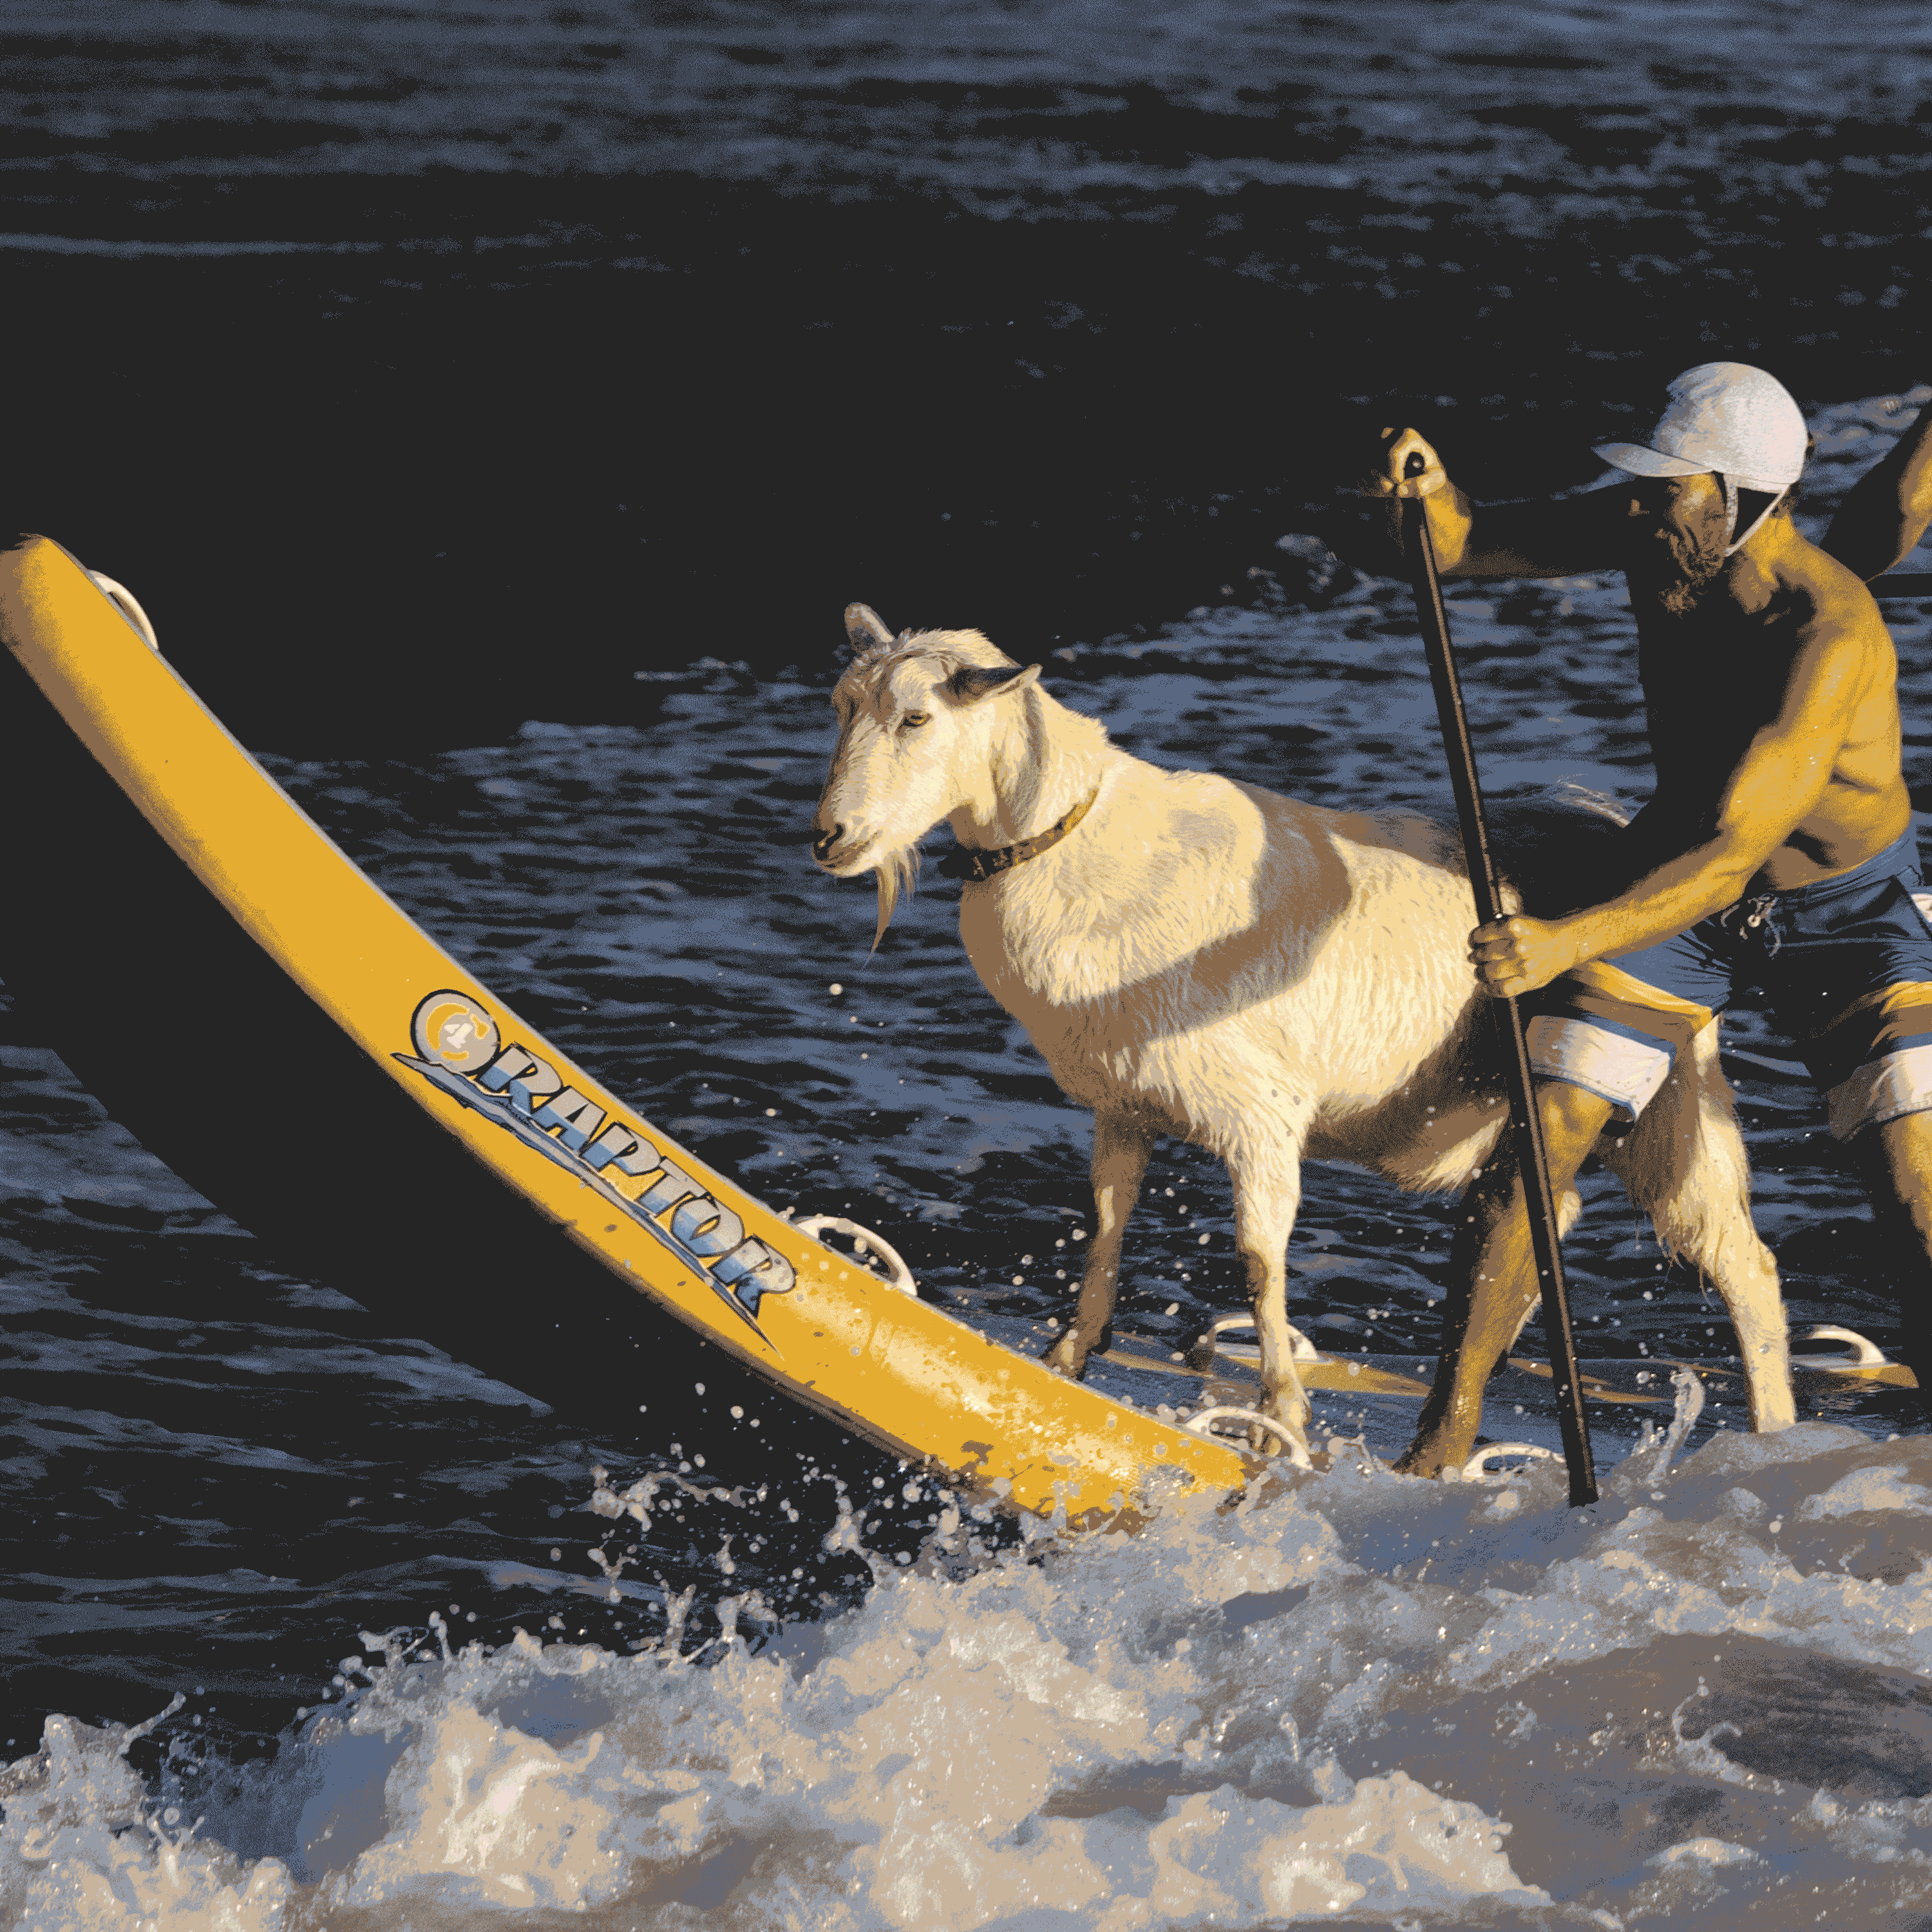 Goats taking on surfing.